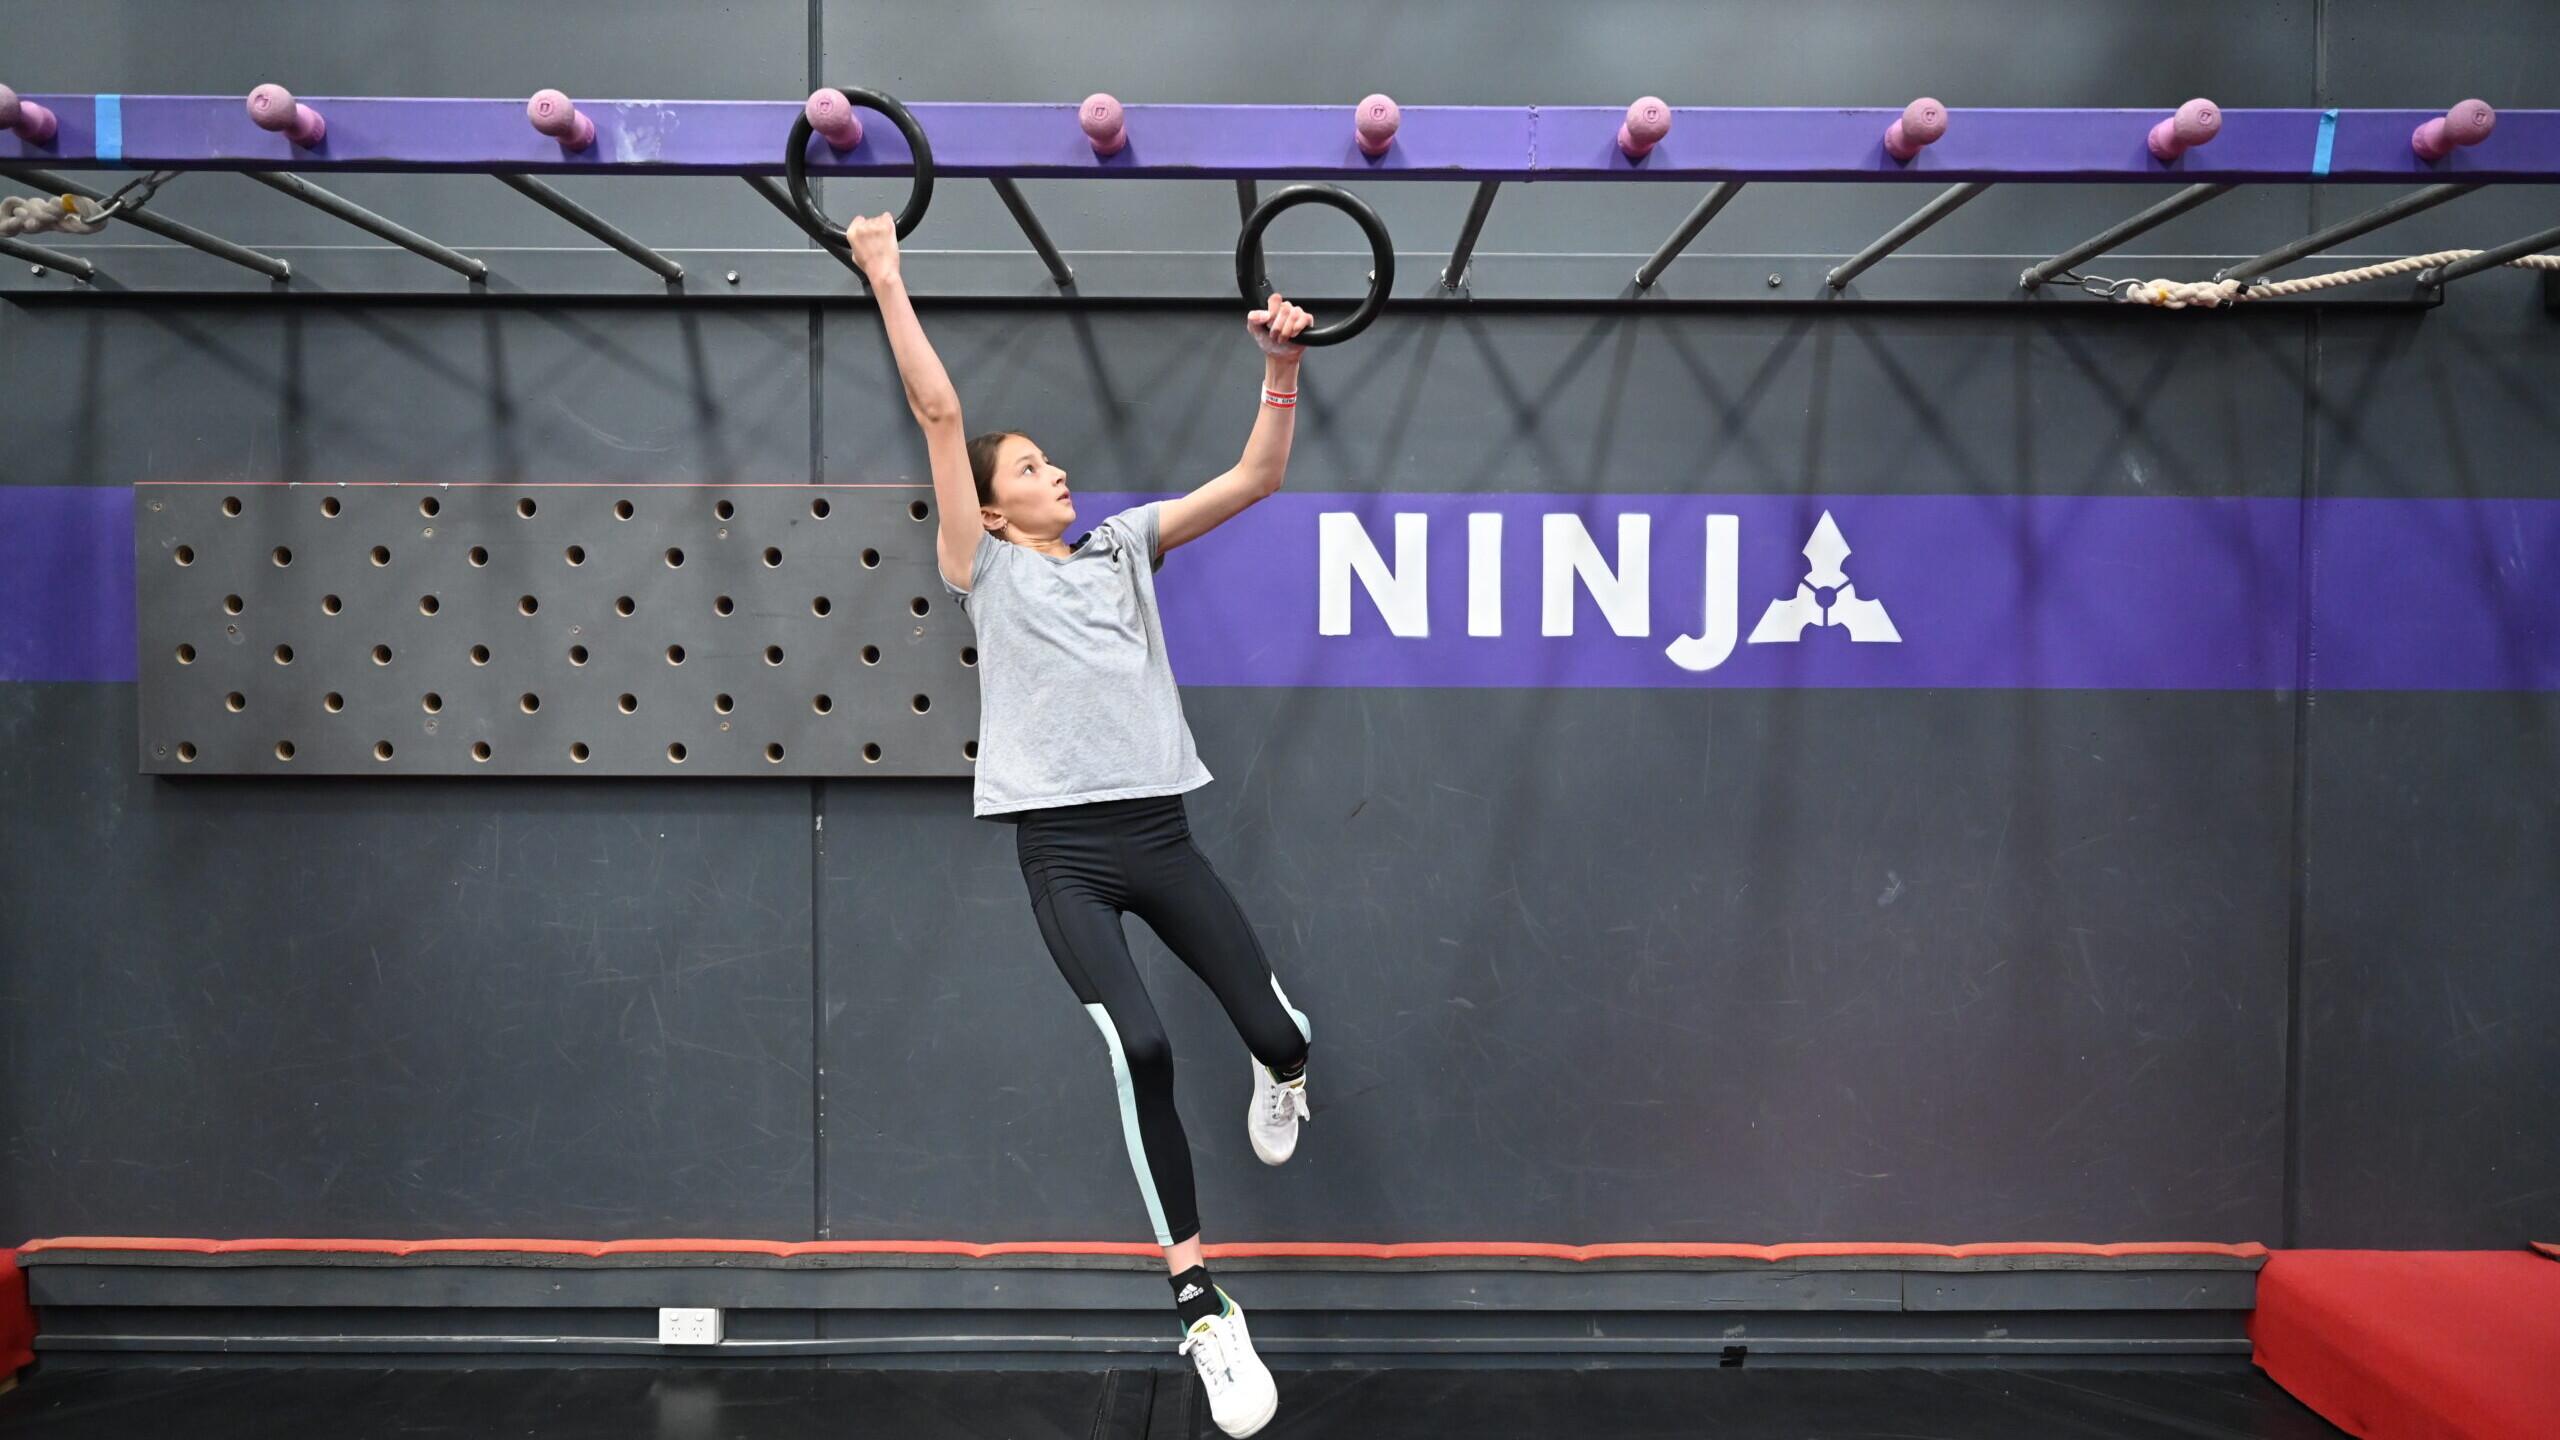 ANG Qualifier DSC 0382 scaled uai at a Ninja Warrior gym in Melbourne, Australia.